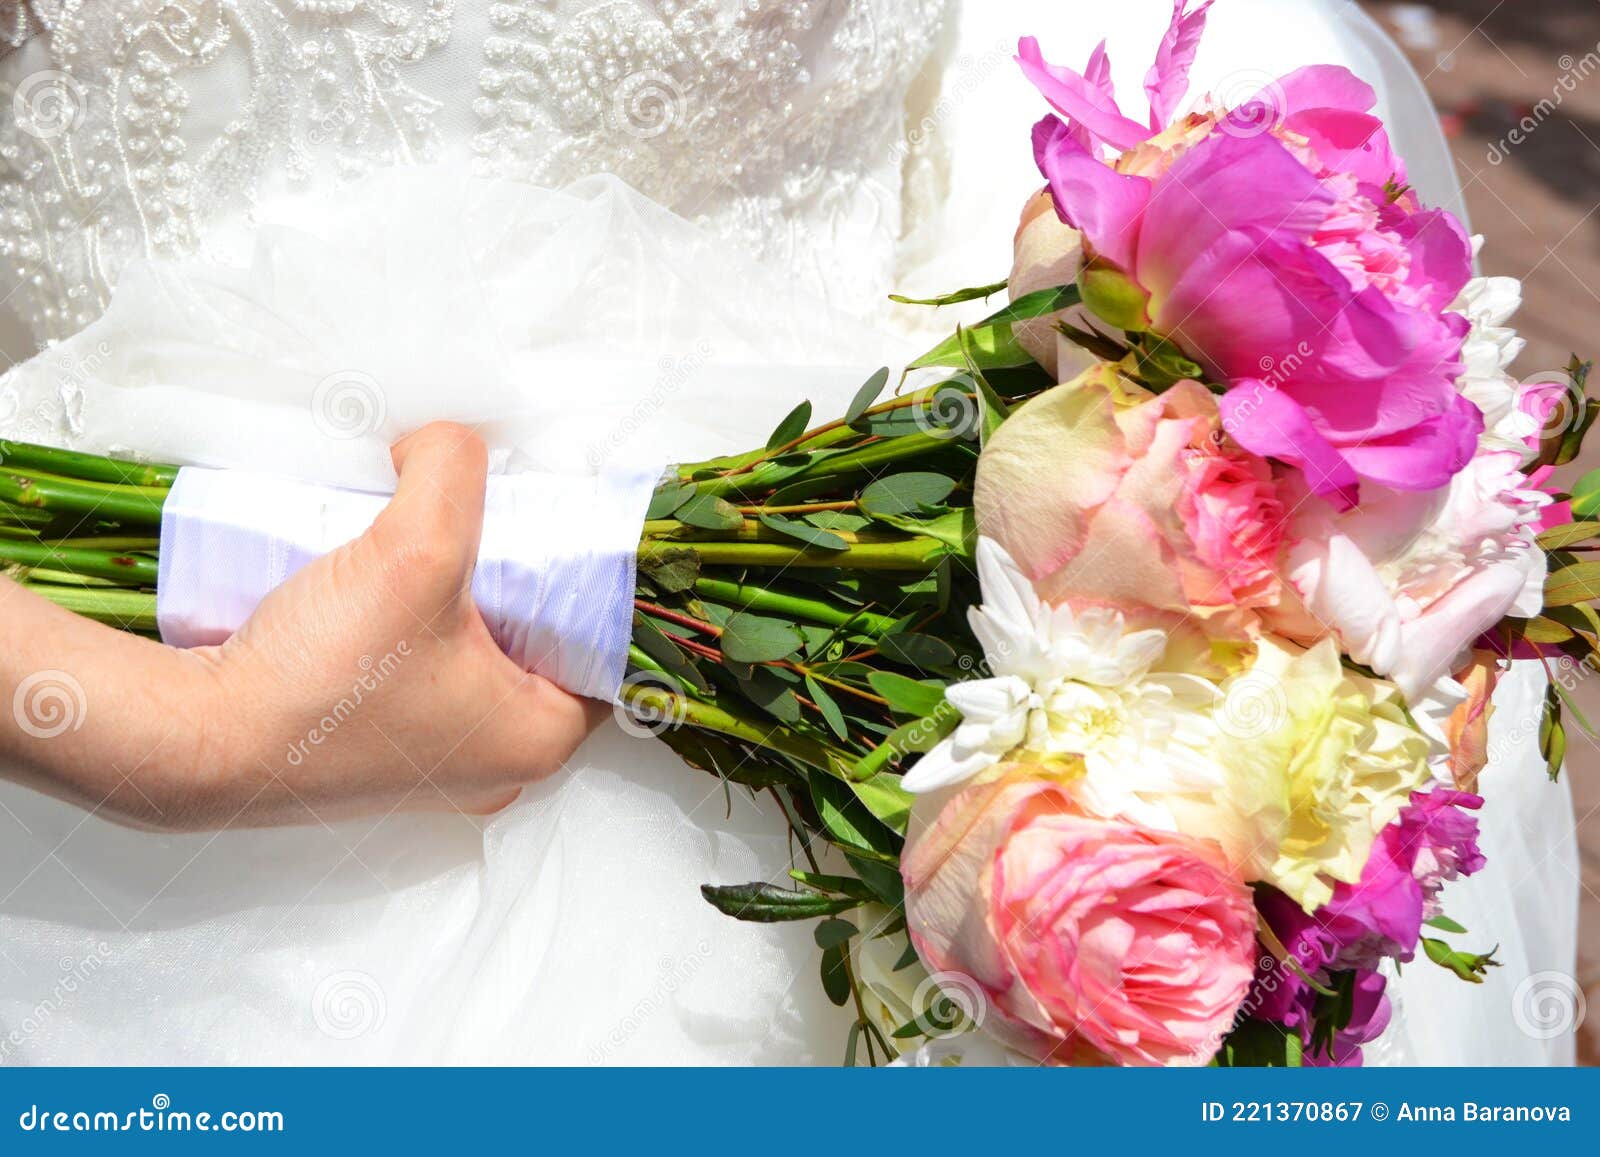 The Bride Holds a Wedding Bouquet in Her Hand Stock Image - Image of ...